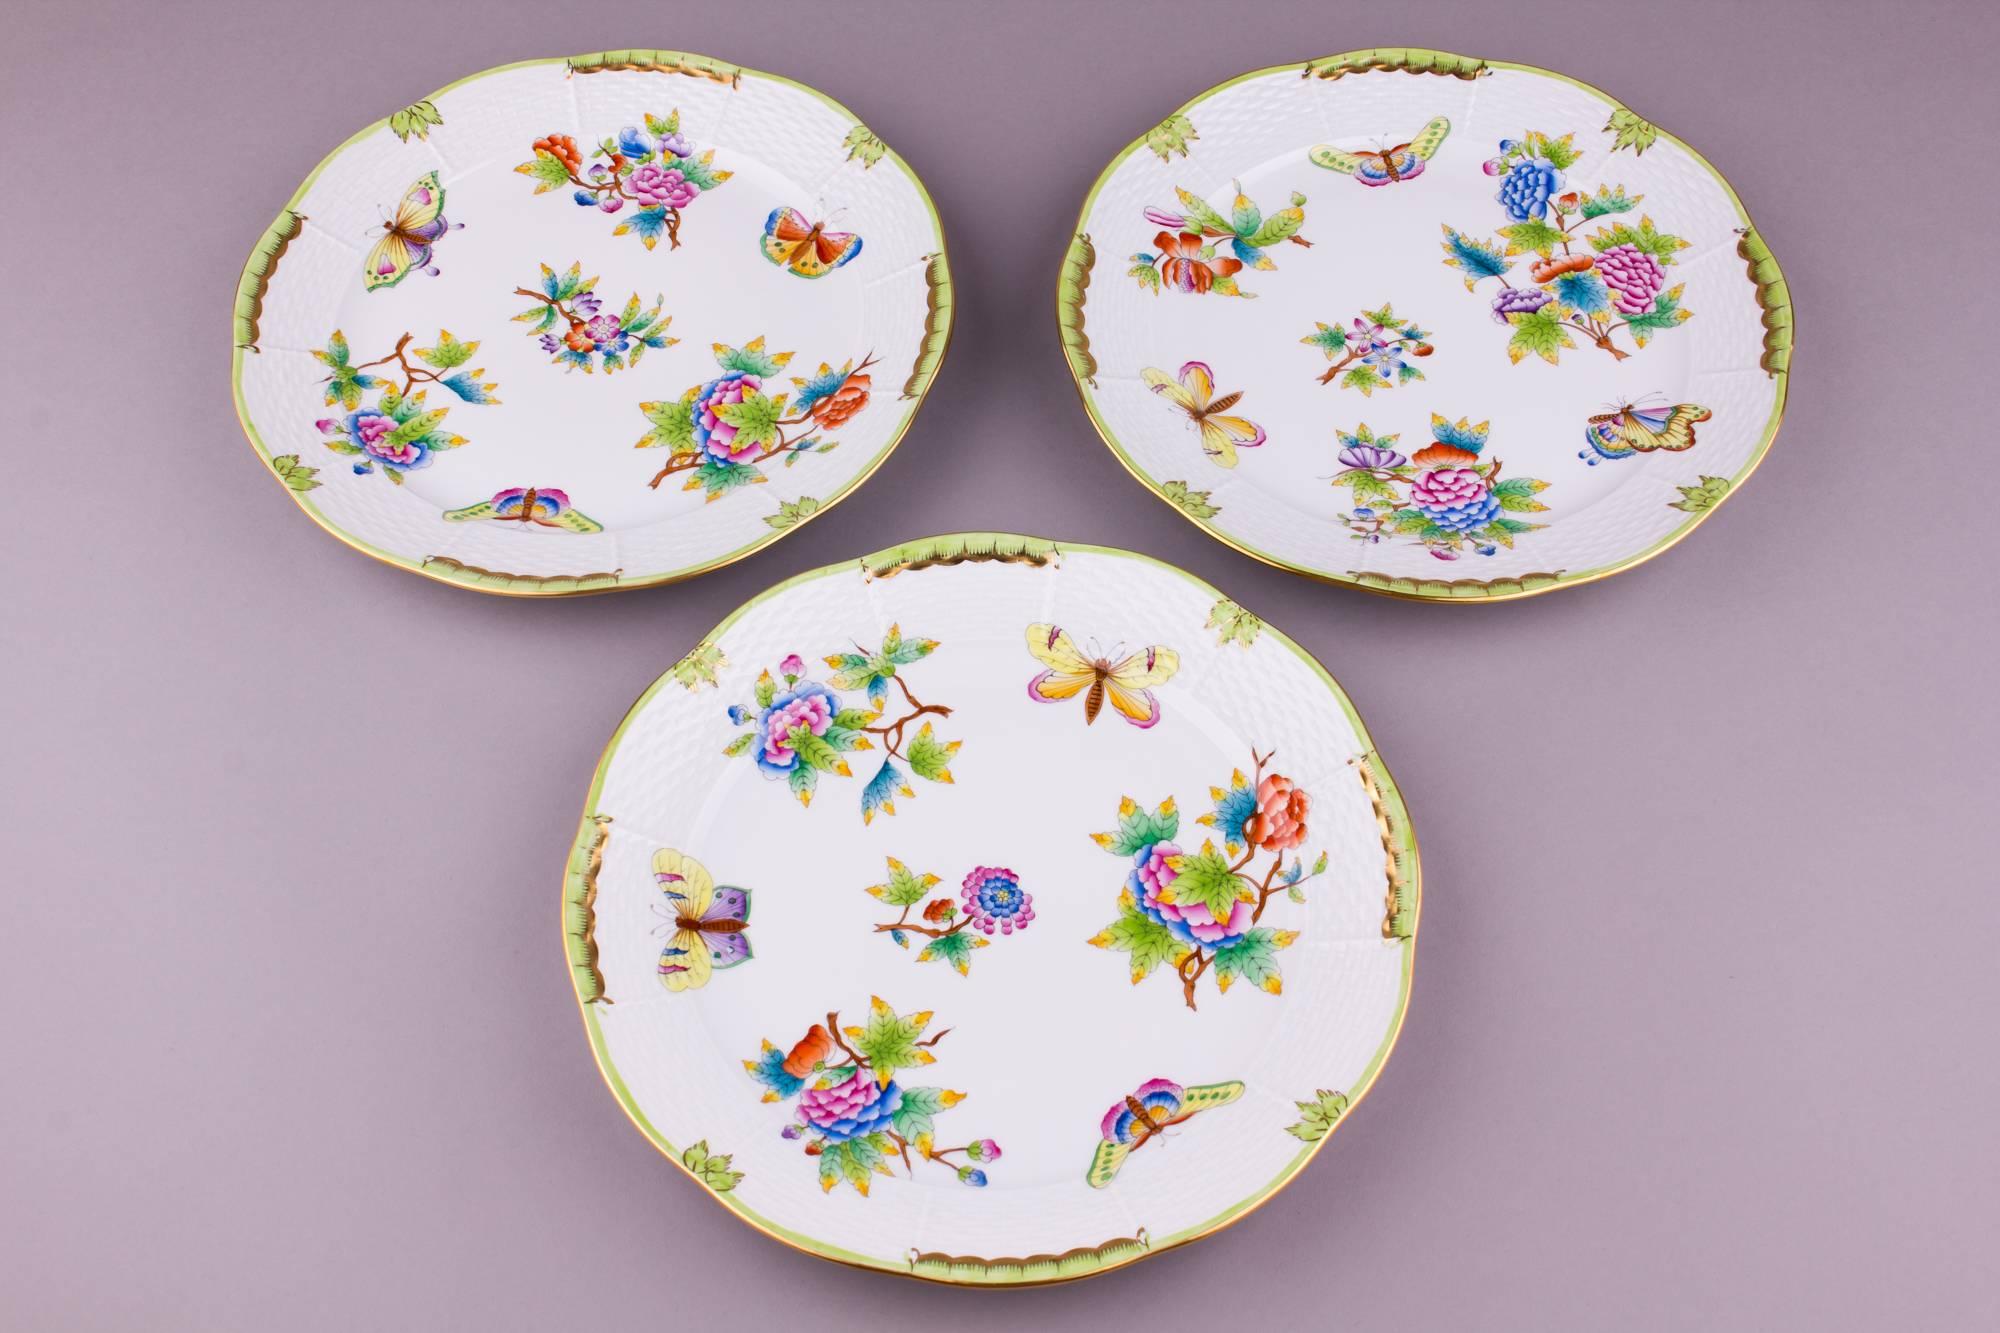 Hungarian Herend Queen Victoria Plate Set for Six Persons, 18 Pieces For Sale